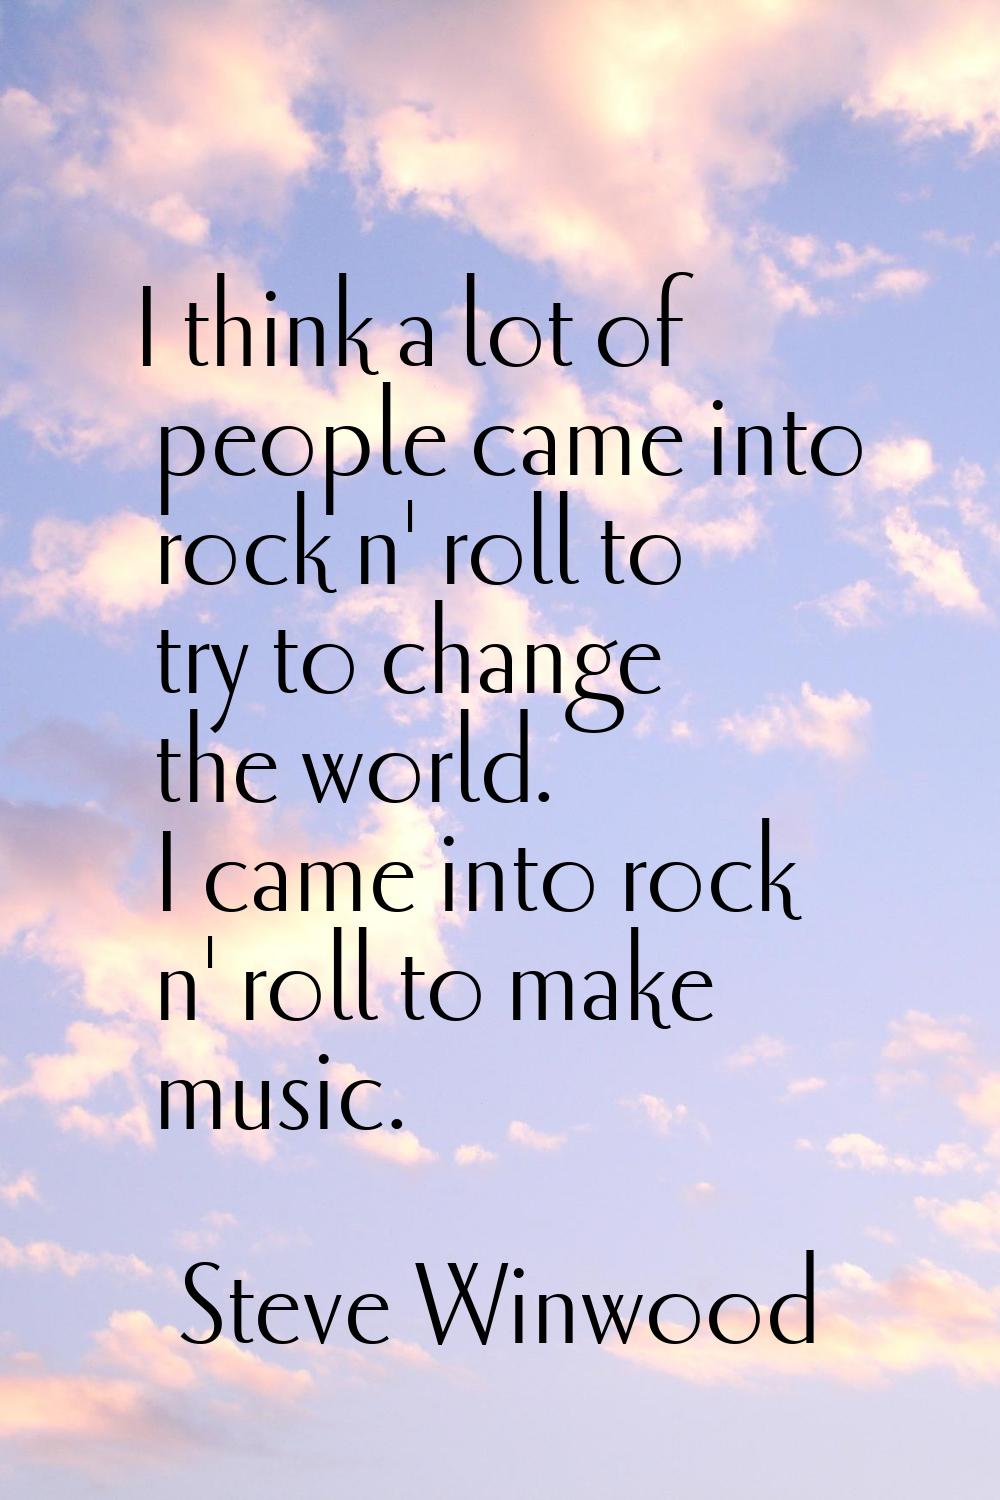 I think a lot of people came into rock n' roll to try to change the world. I came into rock n' roll